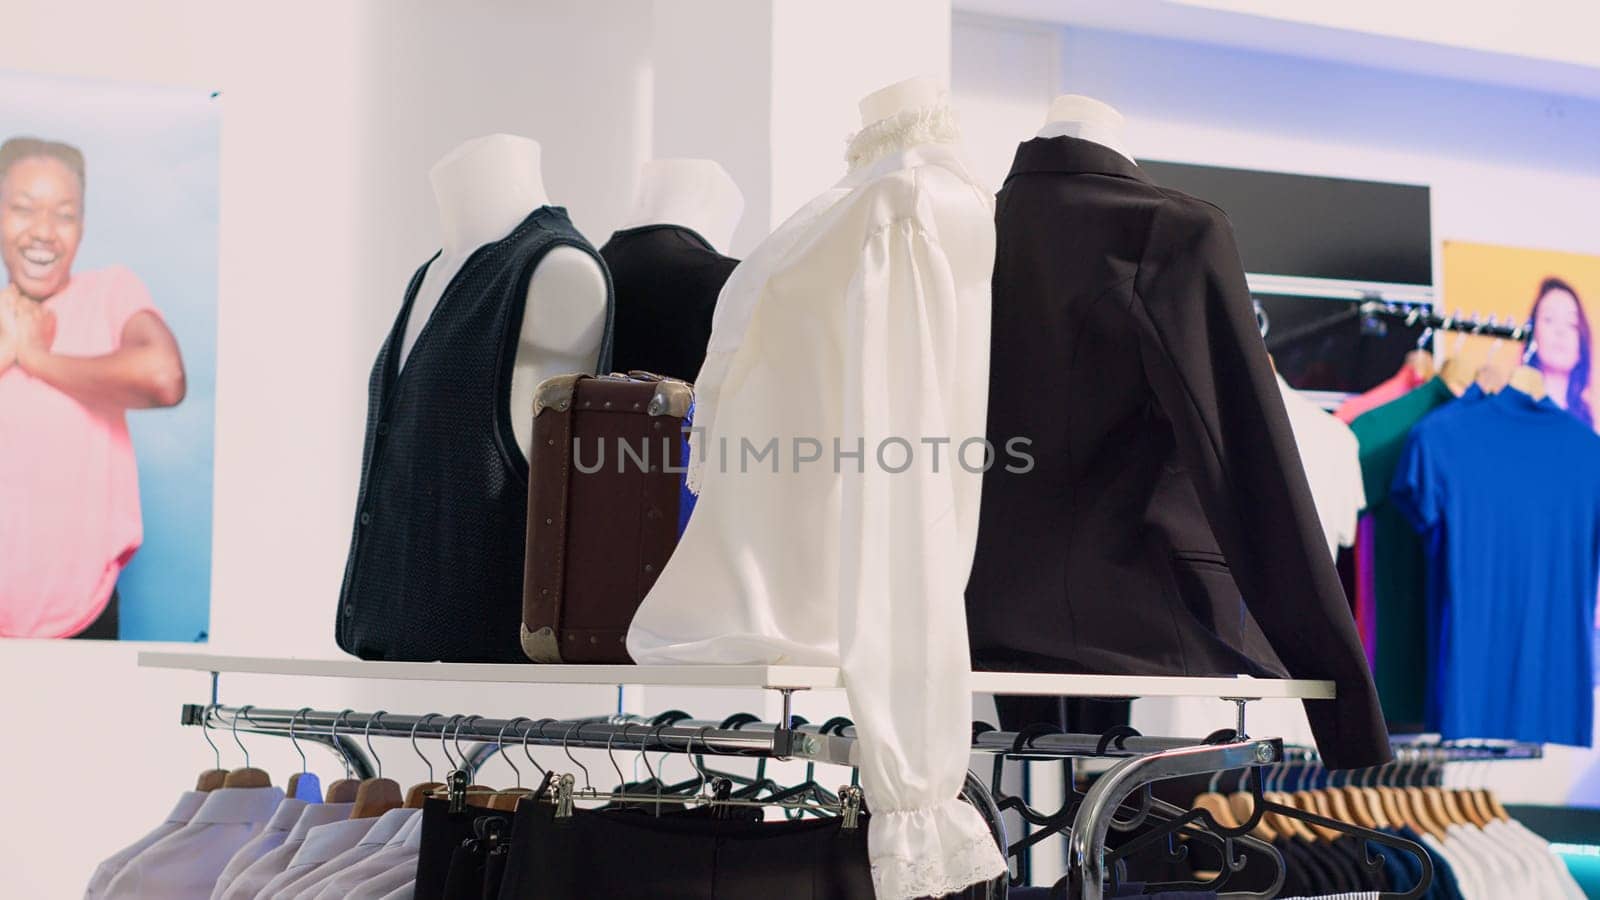 Shopping mall boutique filled with fashion tailoring, multiple racks with fashionable formal wear. Empty clothing showroom with trendy shirts on hangers, small business concept.